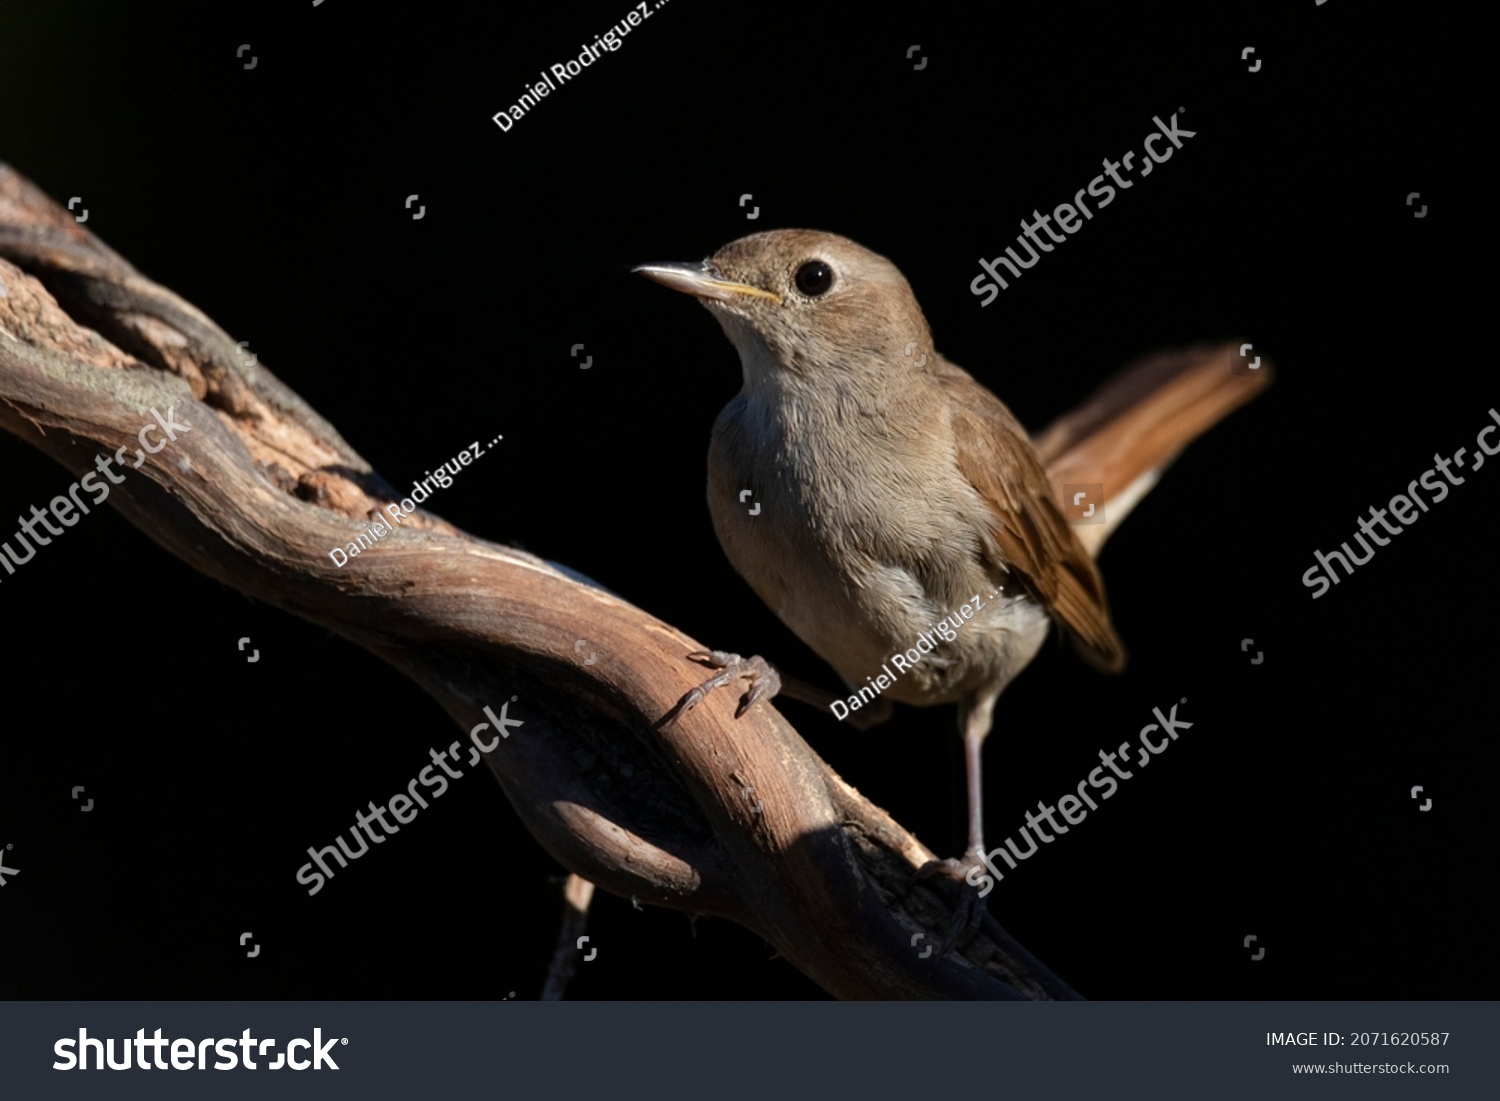 Nightingale perched on a branch, looking at the camera. With black background. Horizontal image. The bird illuminated by the sun with full detail of its plumage. Wildlife concept. #2071620587